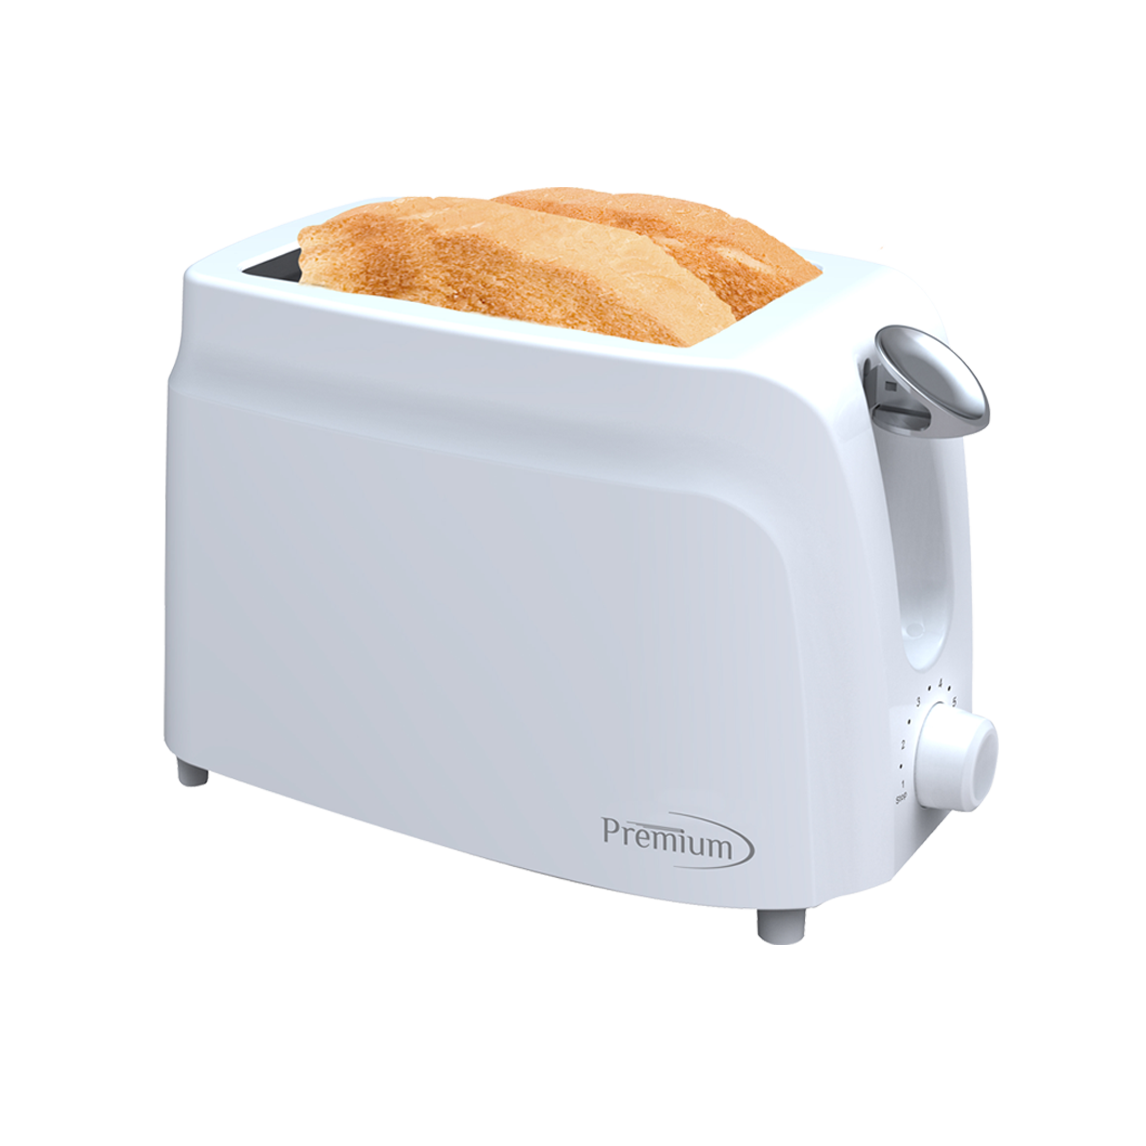 Premium 2 Slice White Toaster Cool touch housing Adjustable browning levels 750W